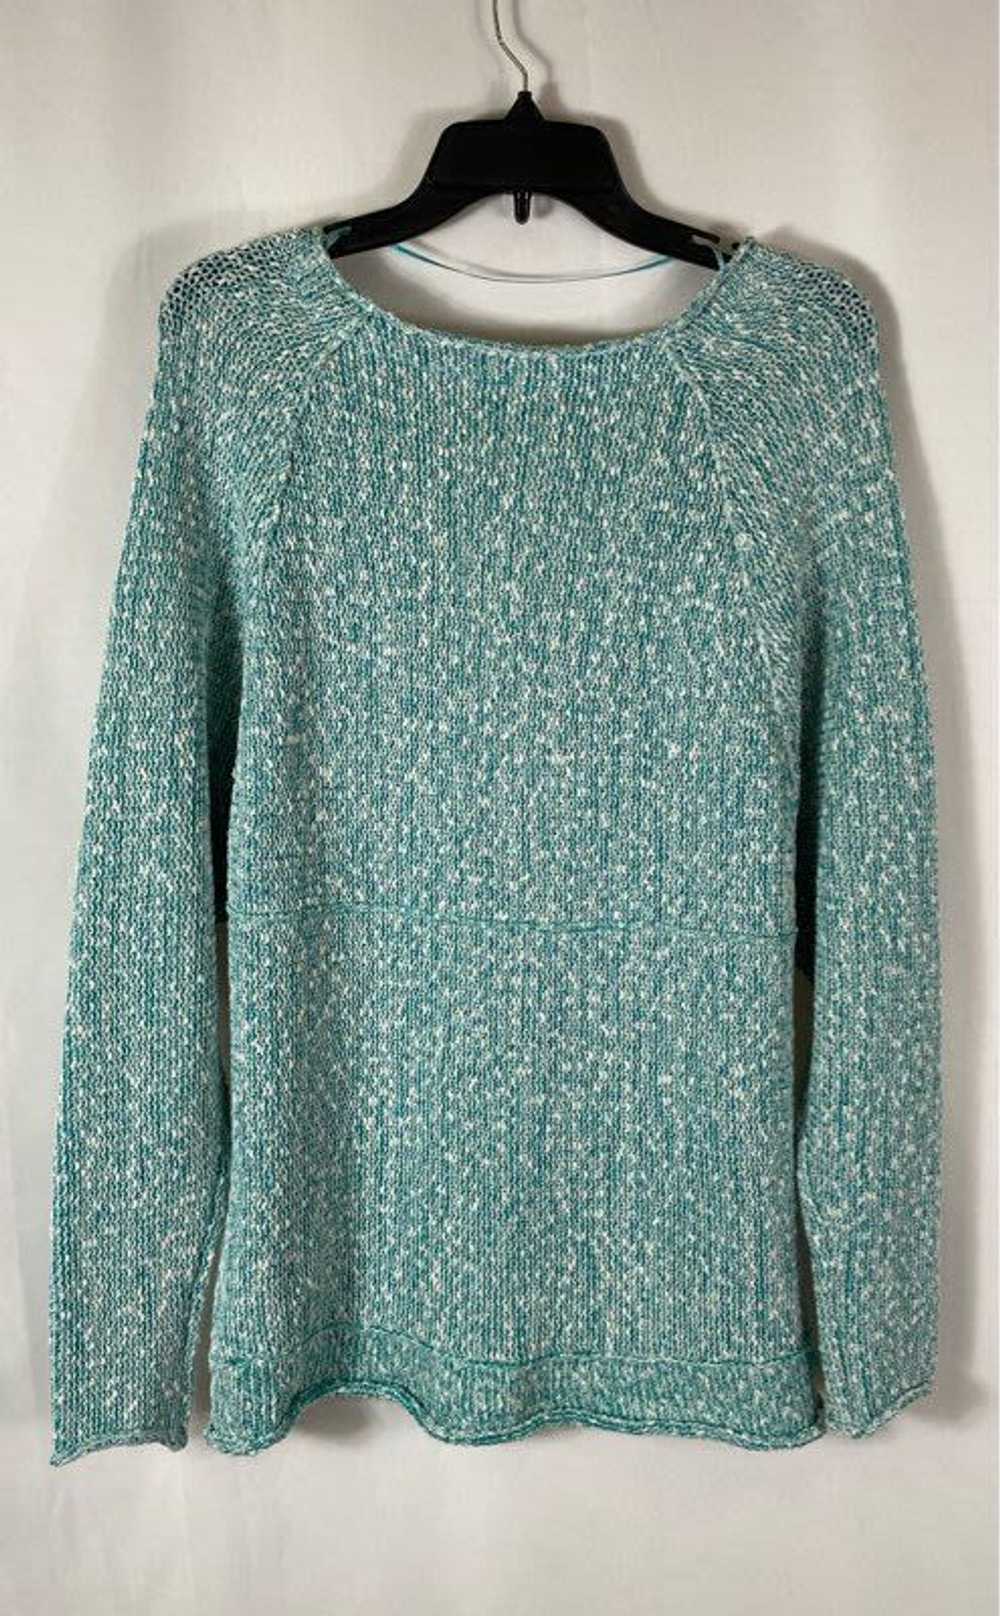 Free People Blue Knit Sweater - Size Small - image 3